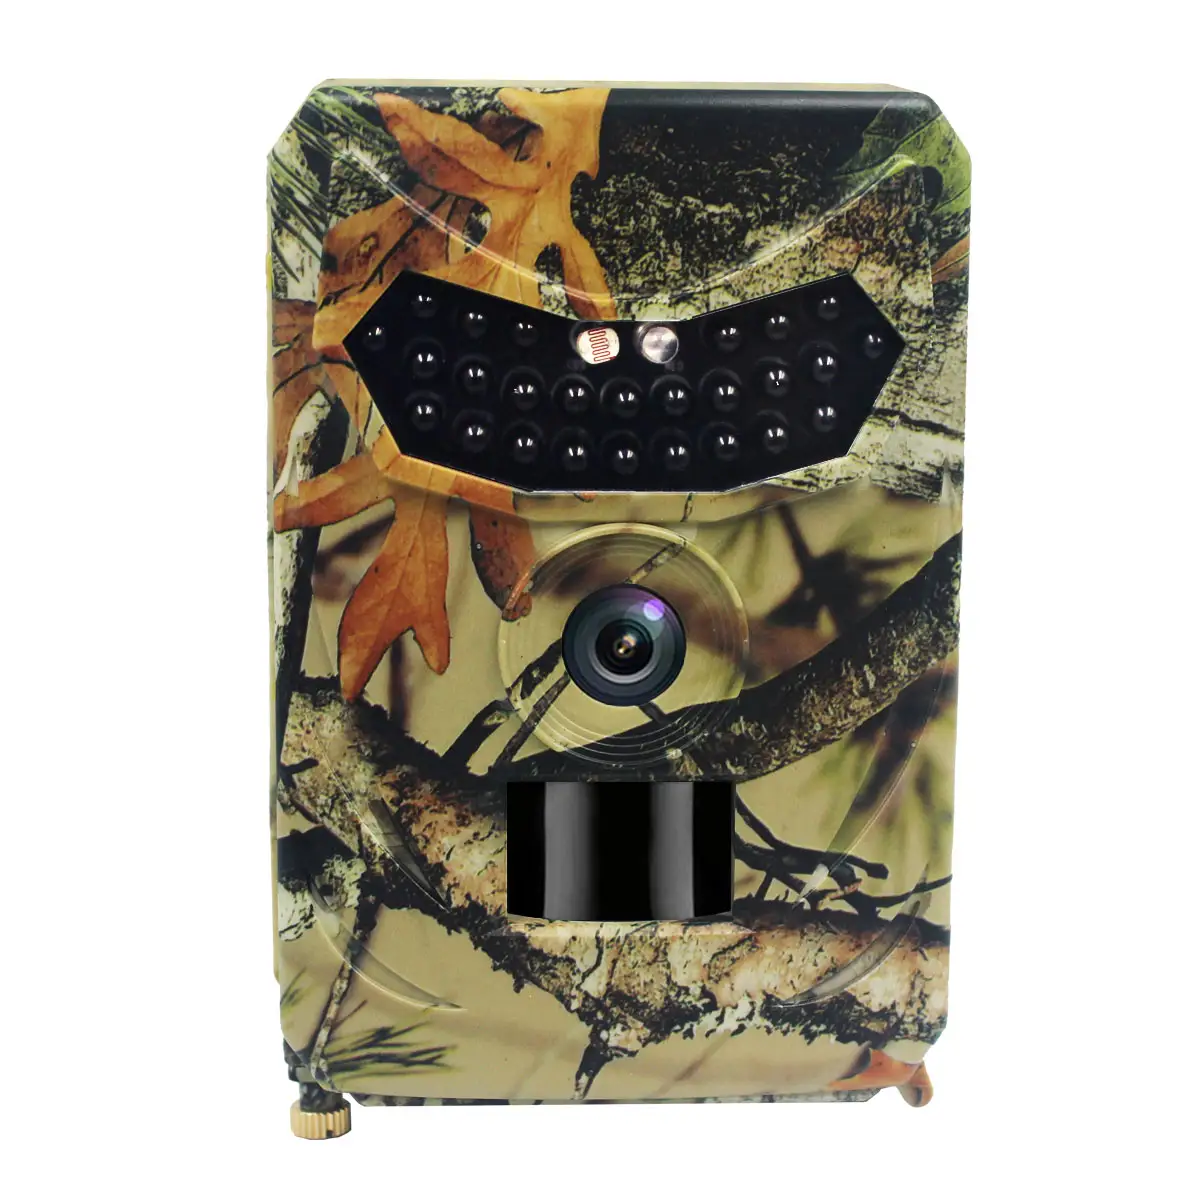 PR-100 Waterproof 1080p infrared digital hunting trail camera with 120 degree wide angle lens